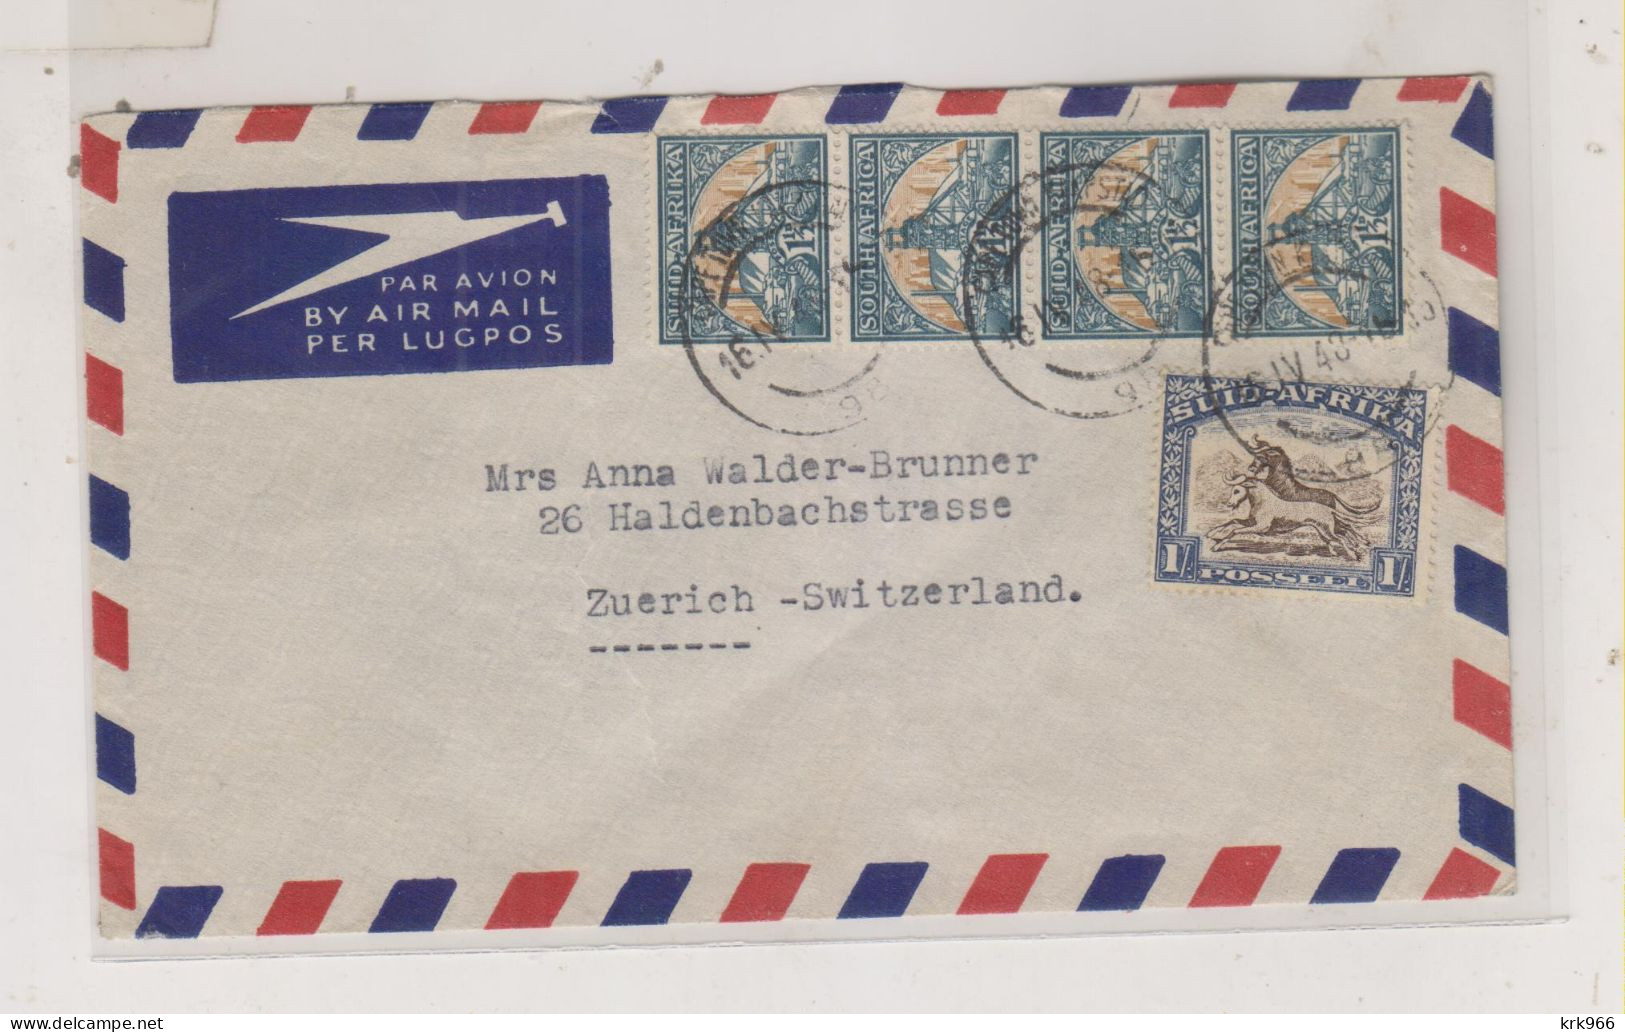 SOUTH AFRICA 1948 CAPE TOWN Nice  Airmail Cover To Switzerland - Luftpost